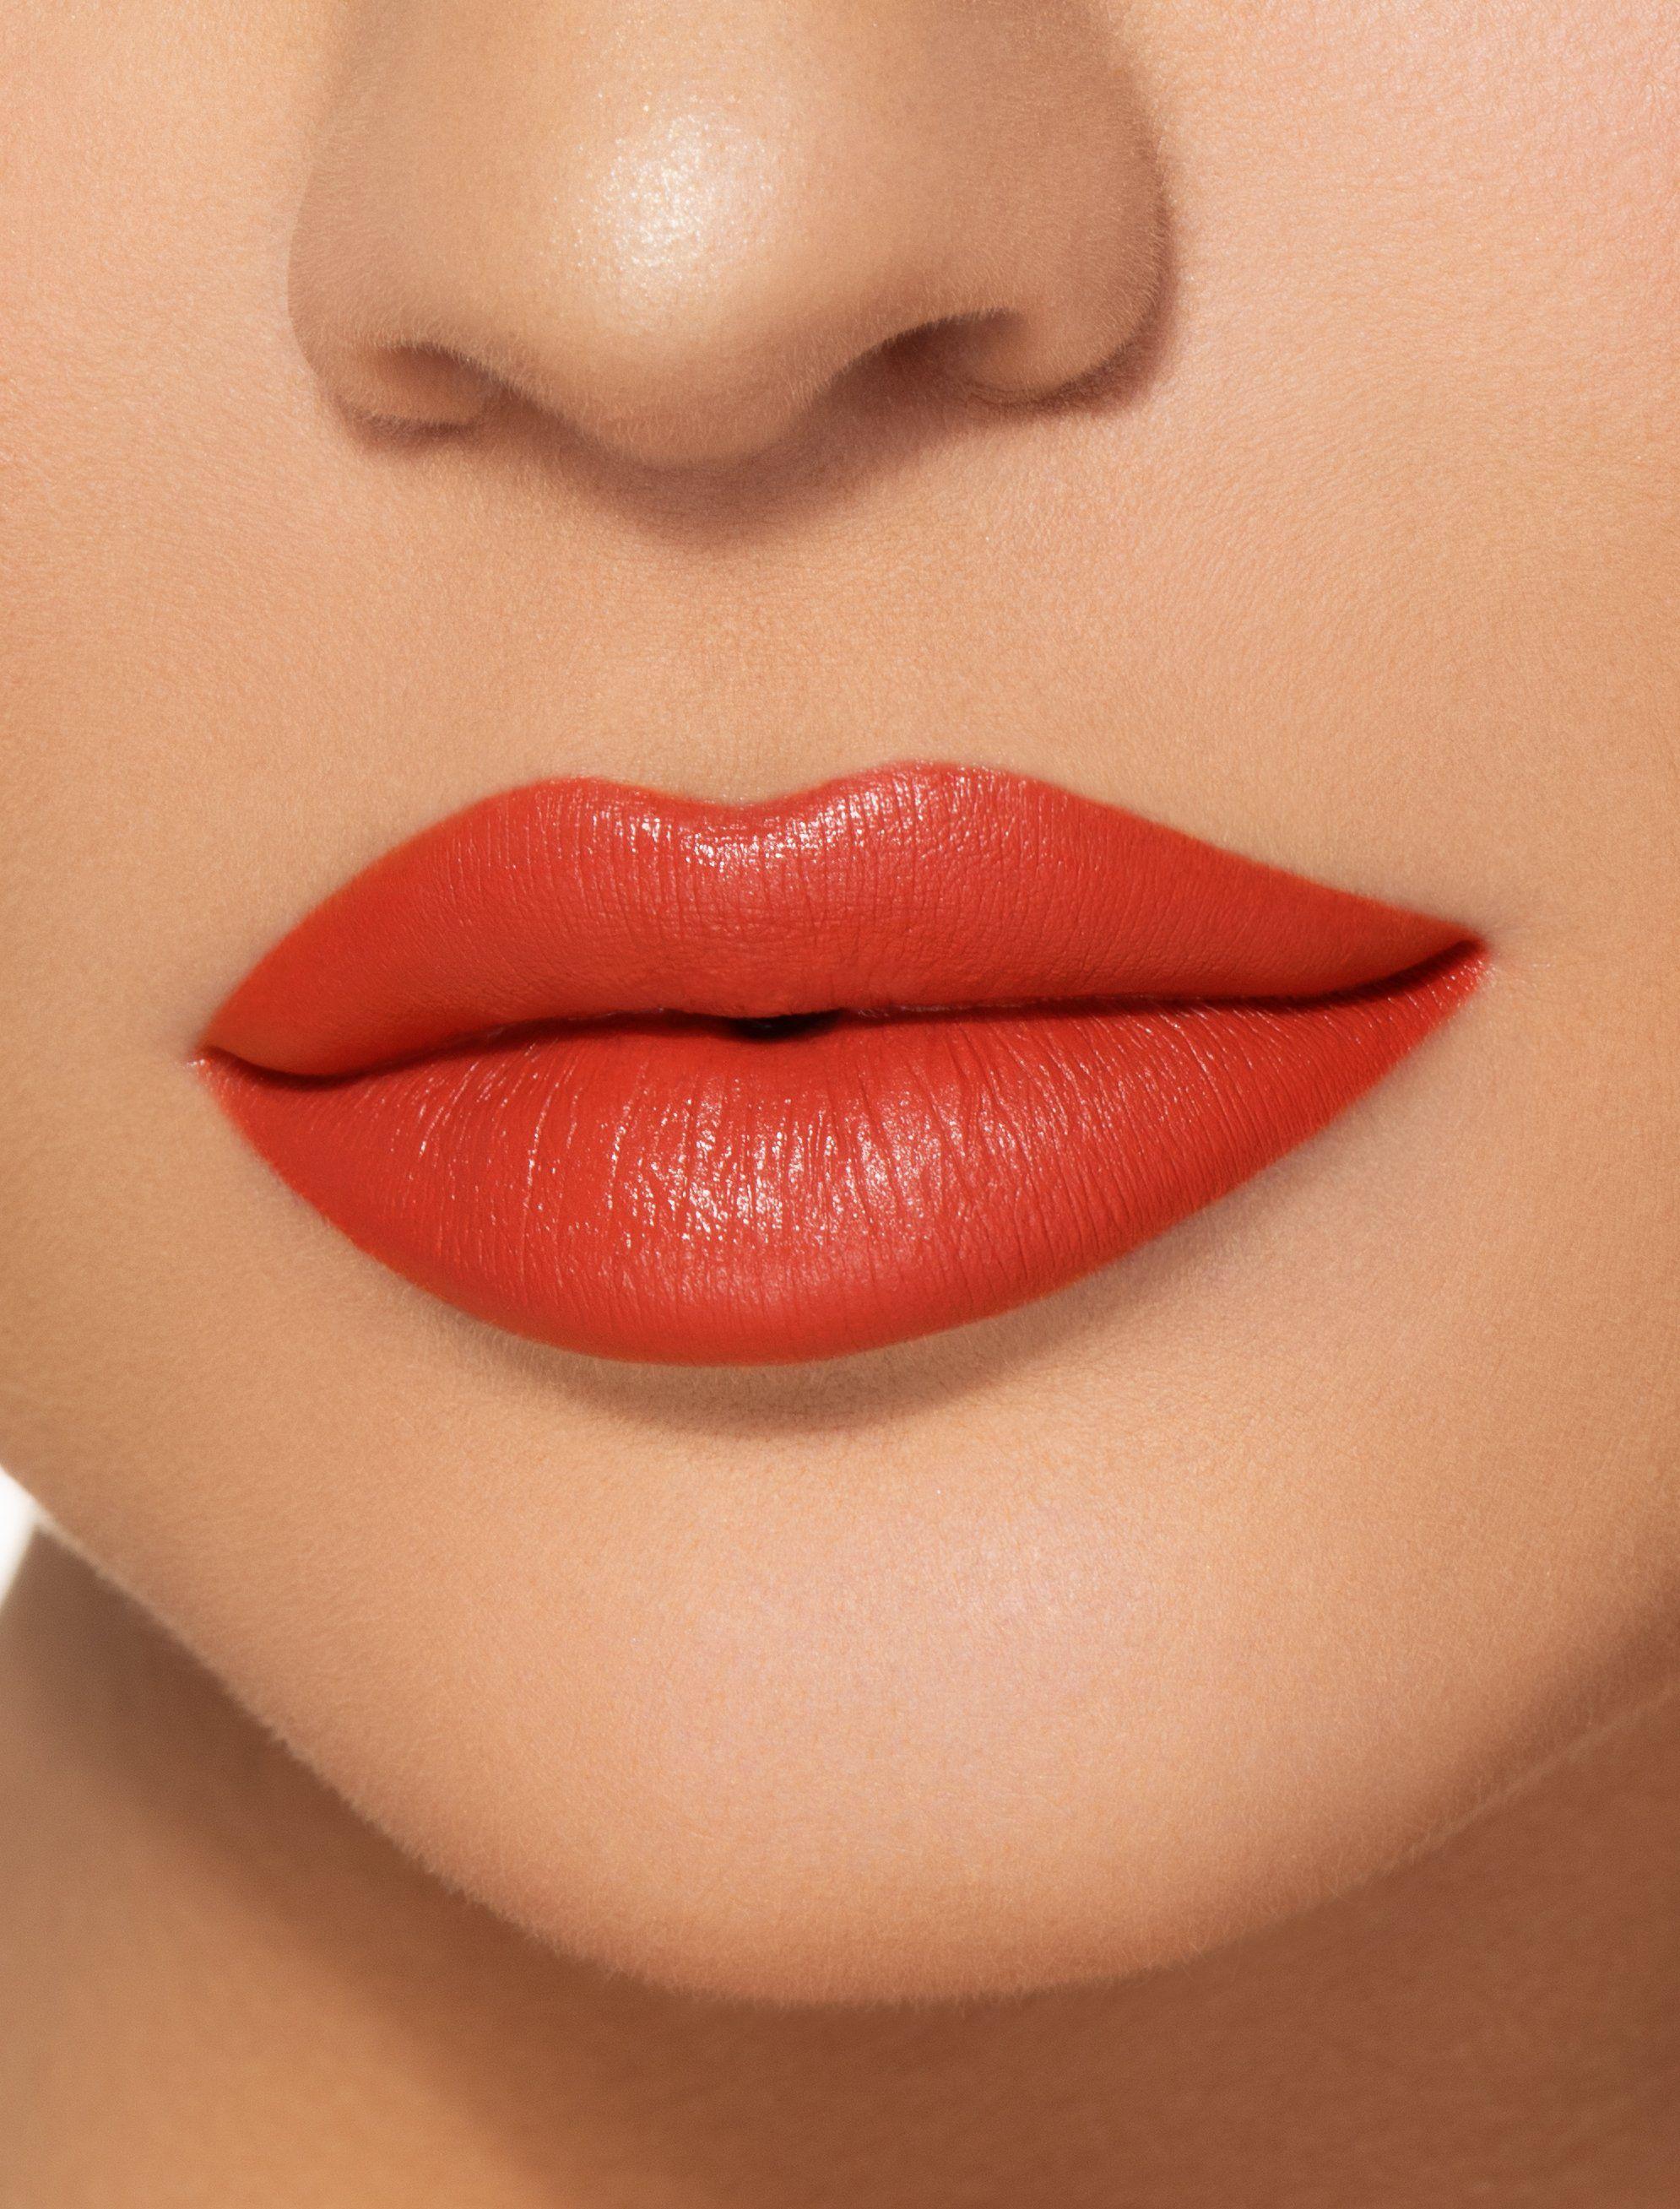 Lipstick Red N Logo - RAD. Velvet Lipstick and Kylie Makeup Collection. Kylie